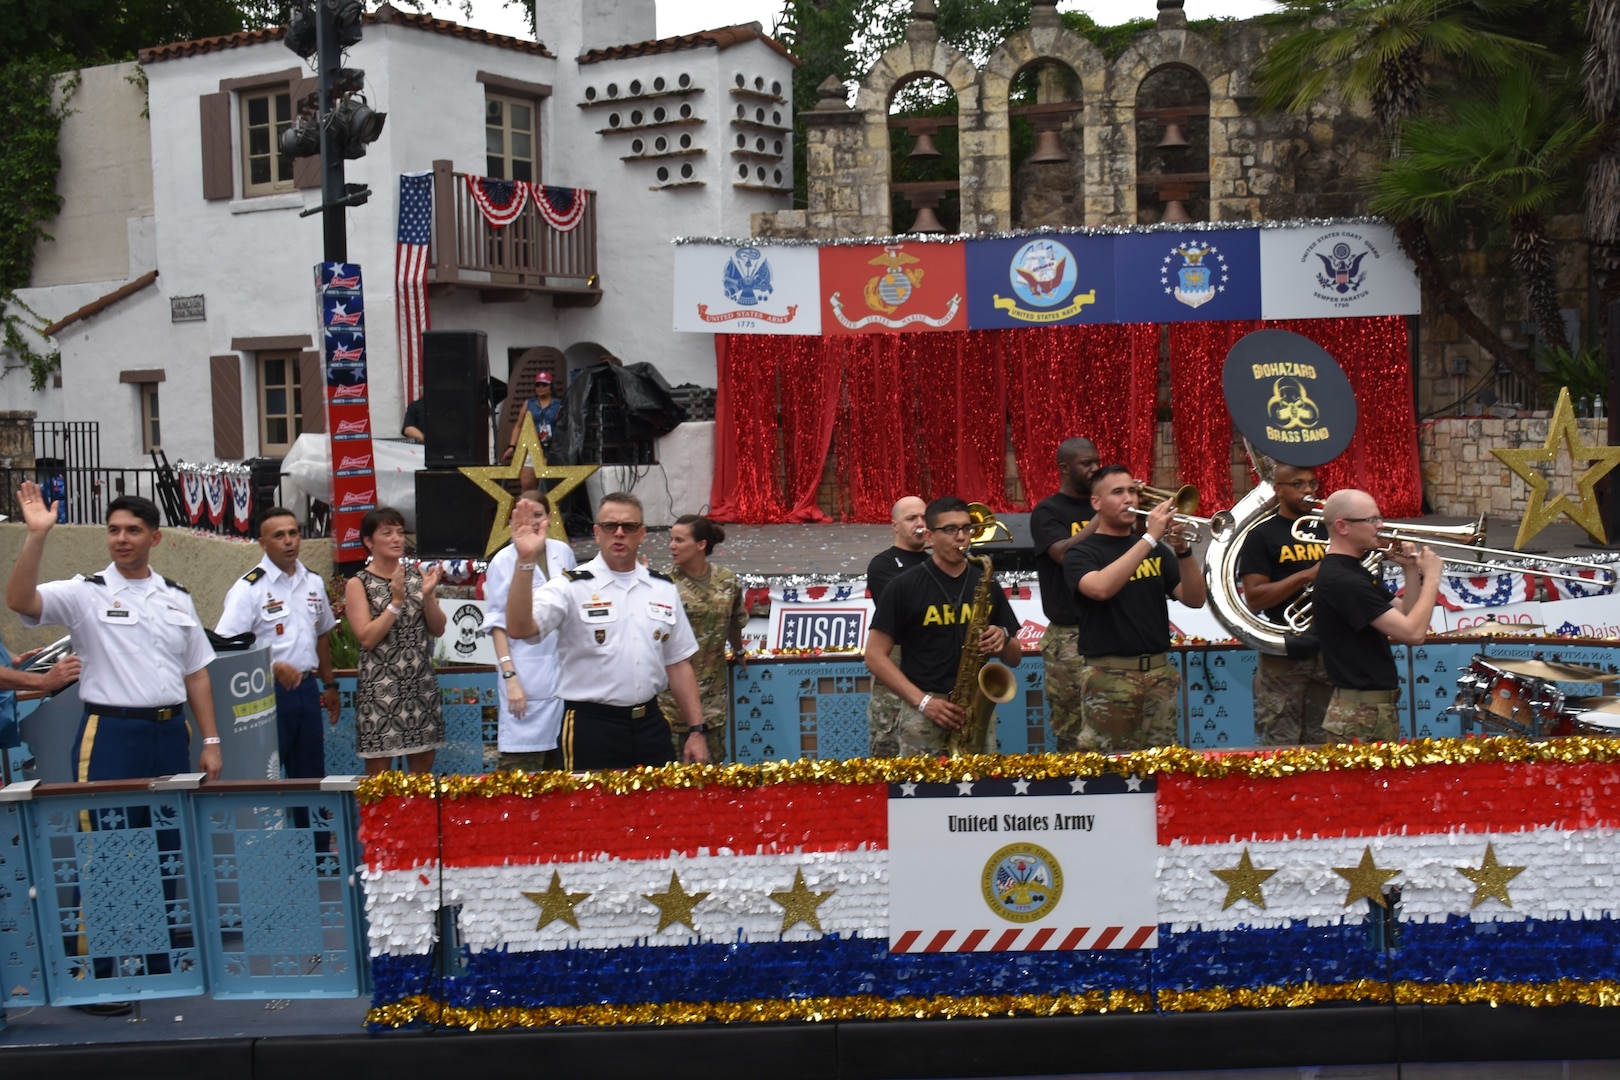 Brig. Gen. Bill Boruff waves to the crowd as the Army float passes the Arneson River Theater during the annual Armed Forces River Parade May 18 in downtown San Antoniox. This year's theme was "Salute Our Heroes." The parade promotes awareness of the joint presence and ties to the military families and community. Representing the U.S. Army in this year's parade were Boruff, commanding general, Mission and Installation Contracting Command; MICC Command Sgt. Maj. Marcos Torres,  and Capt. Jim Jimenez, aide de camp for the MICC commanding general.